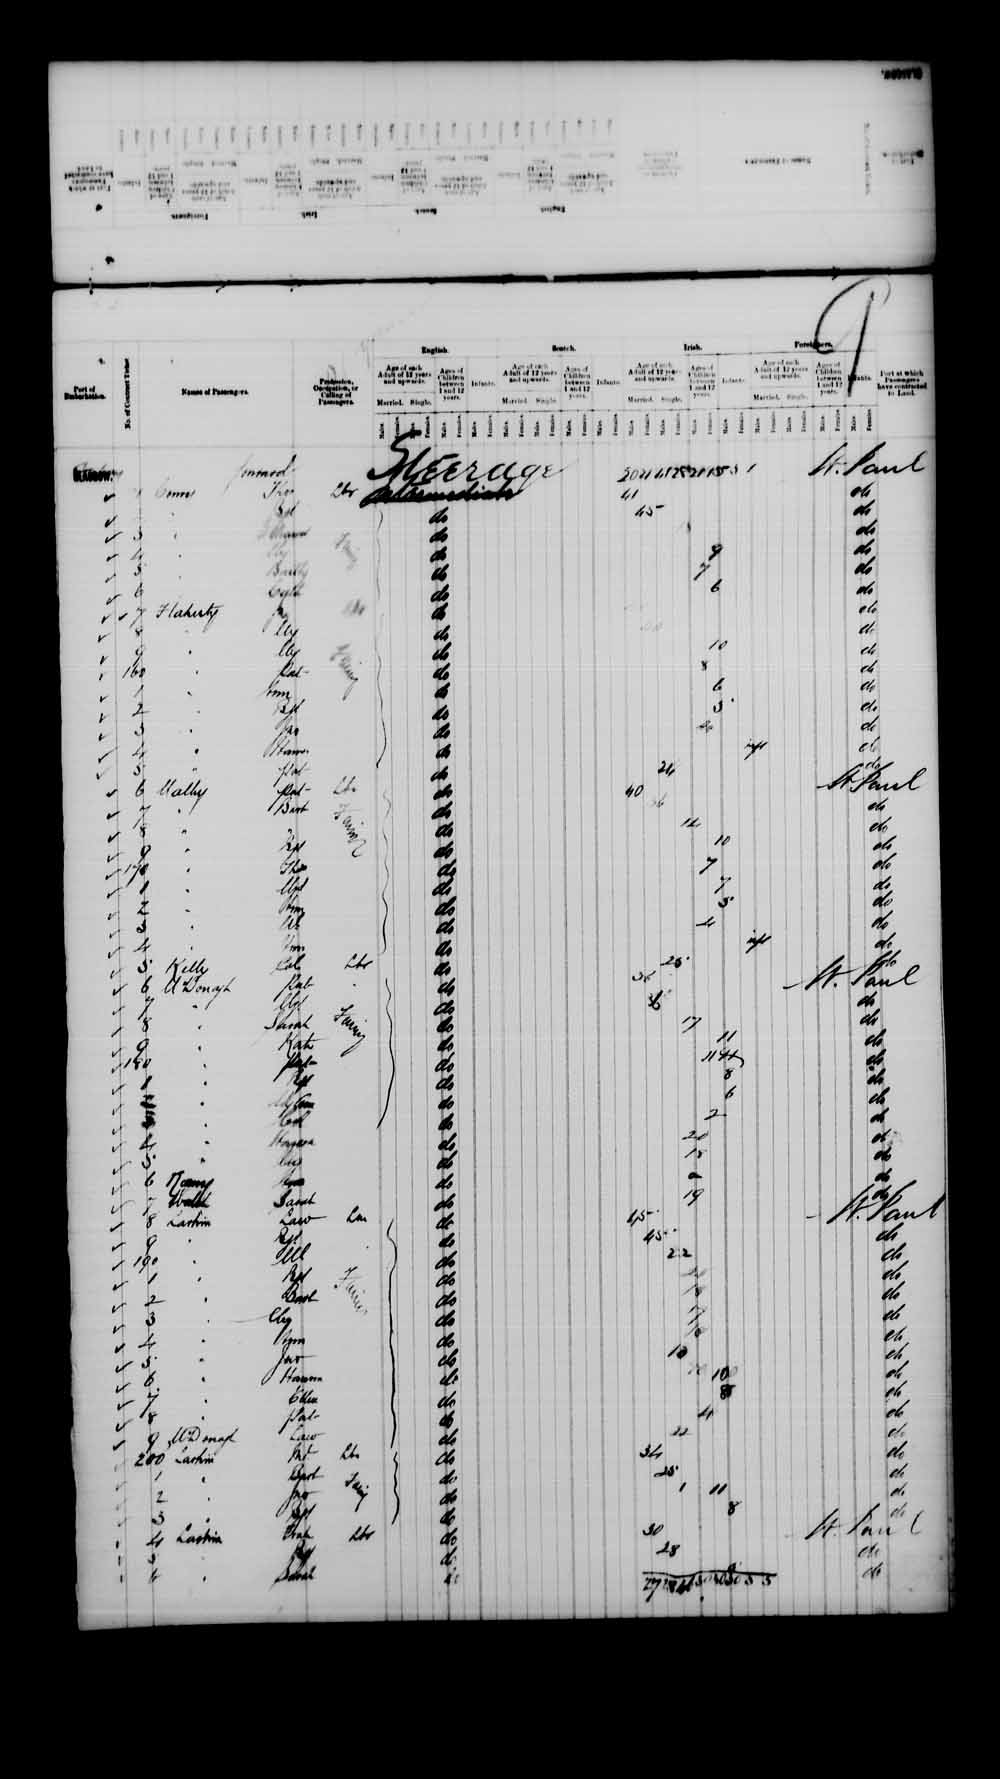 Digitized page of Passenger Lists for Image No.: e003542786